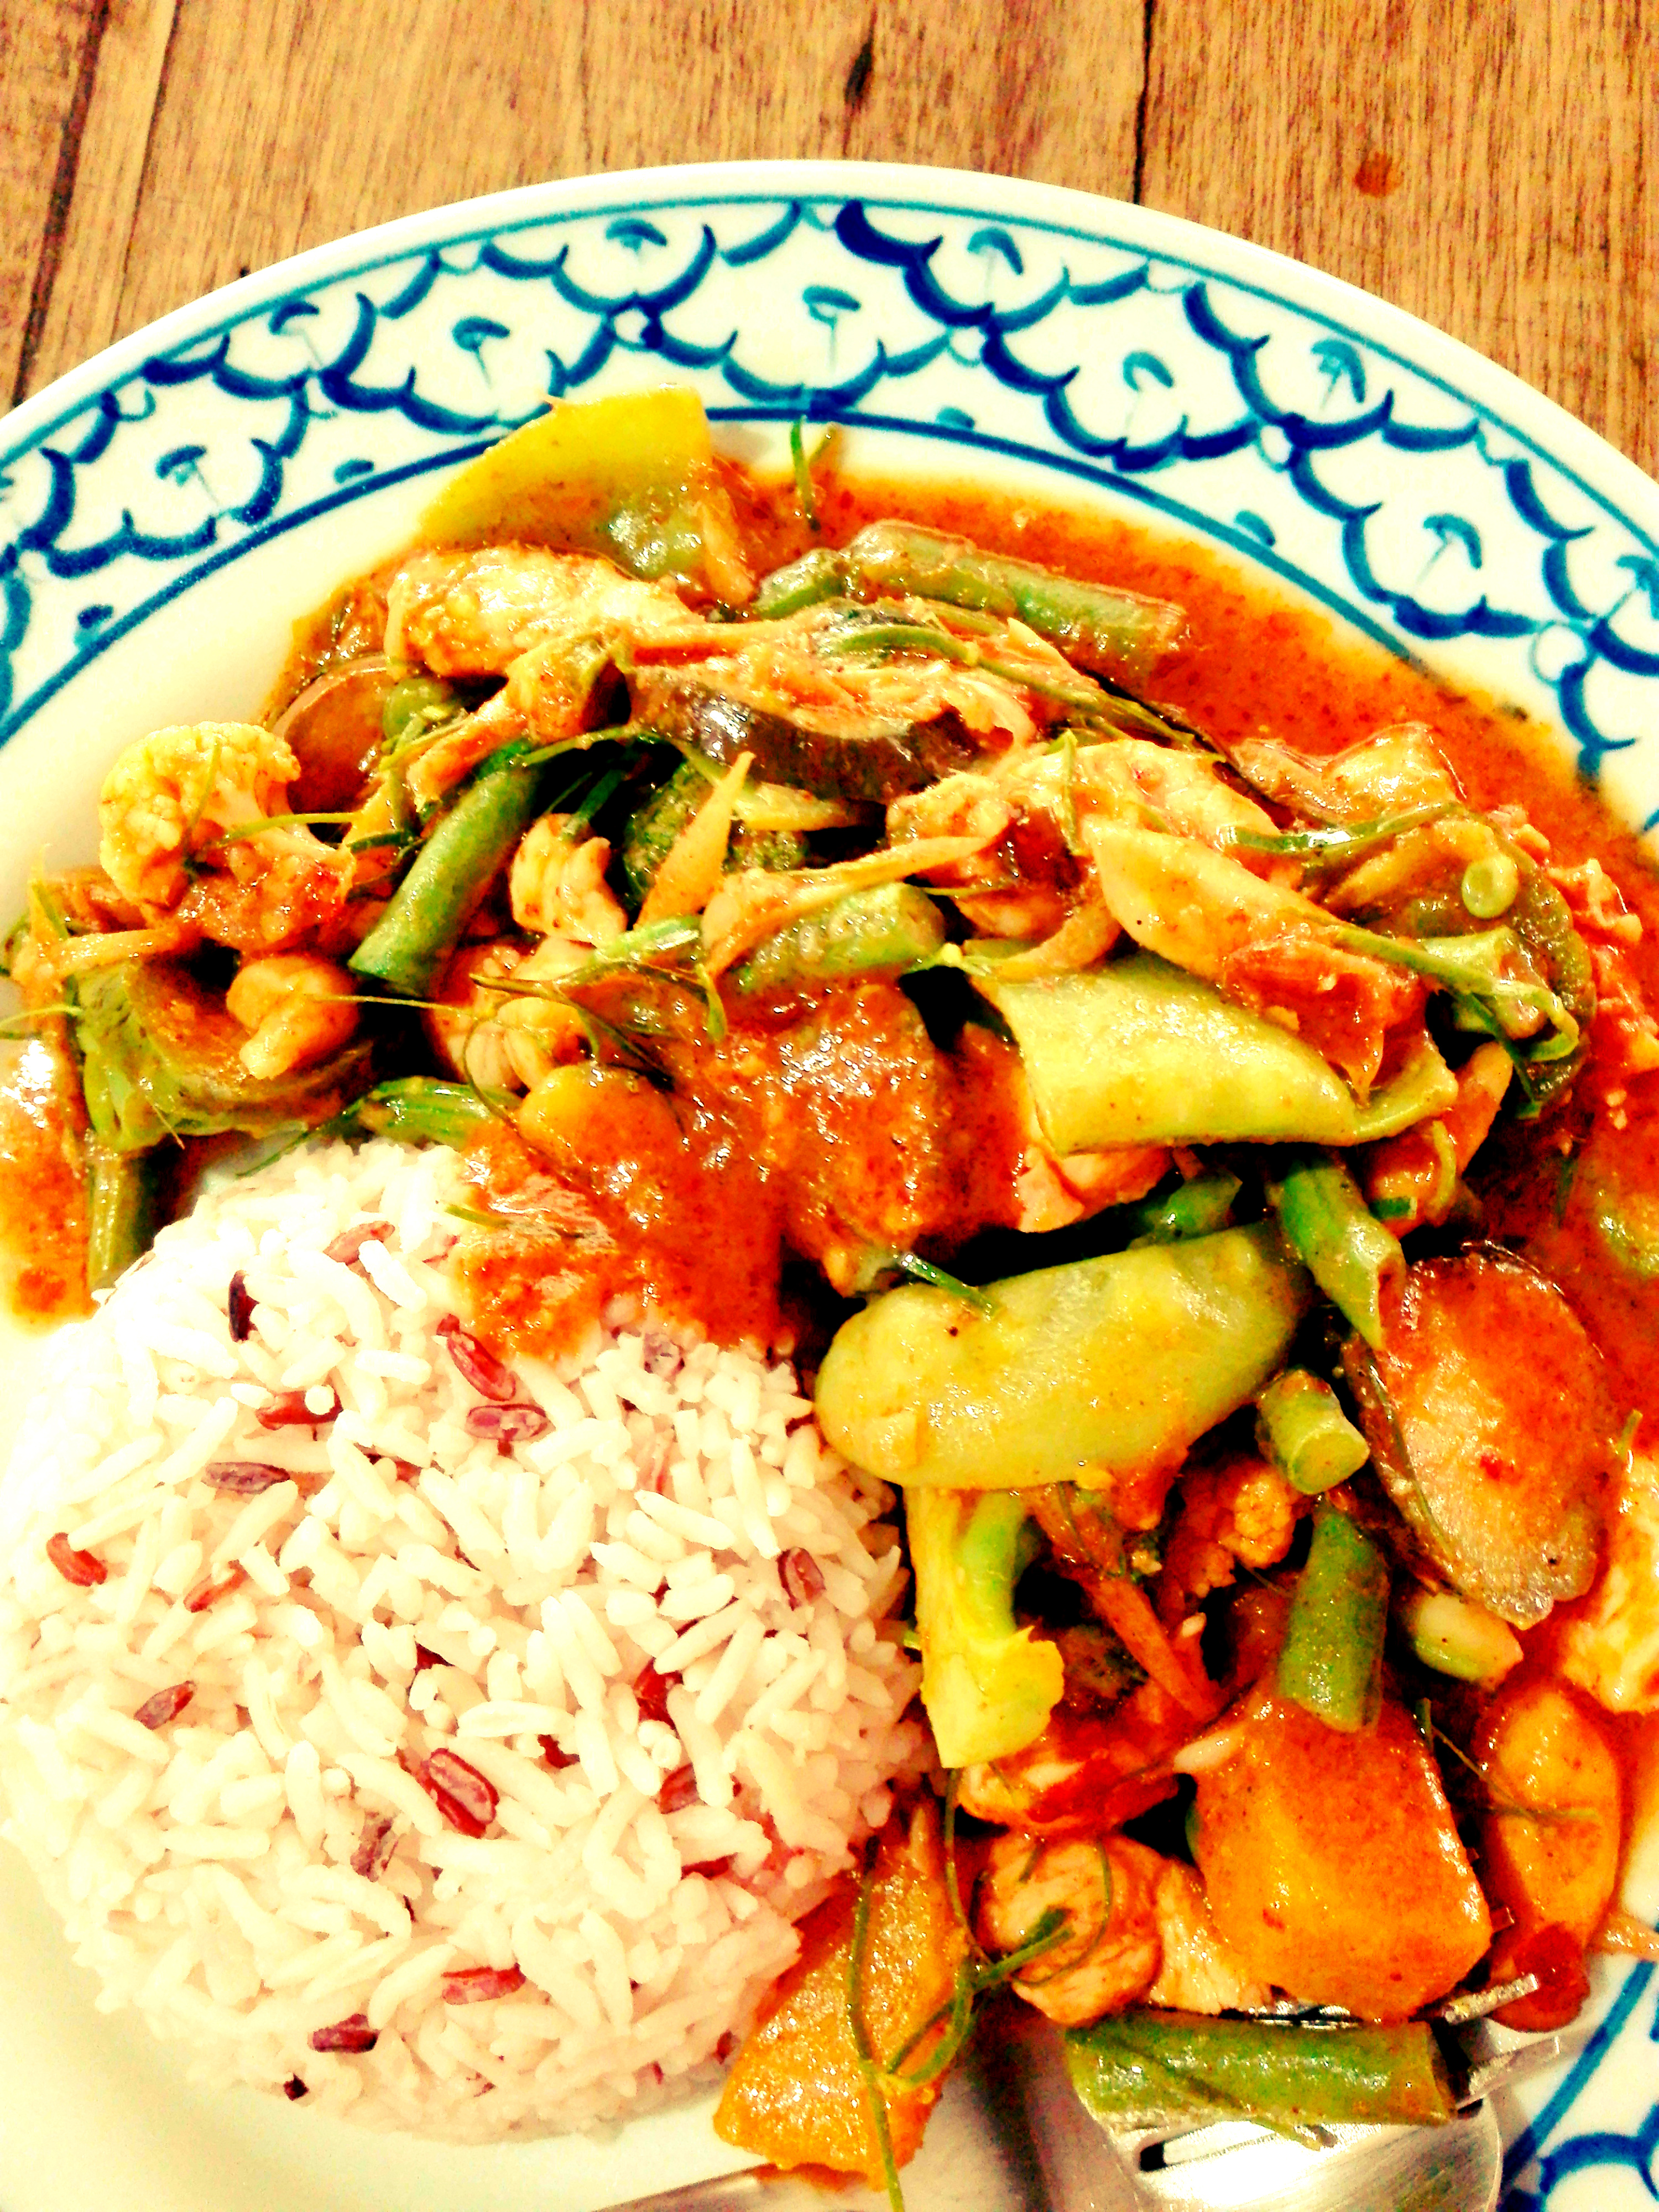 Amazing Thai Panang Curry (พะแนงหมู) in Chiang Mai at Funky Dog Cafe